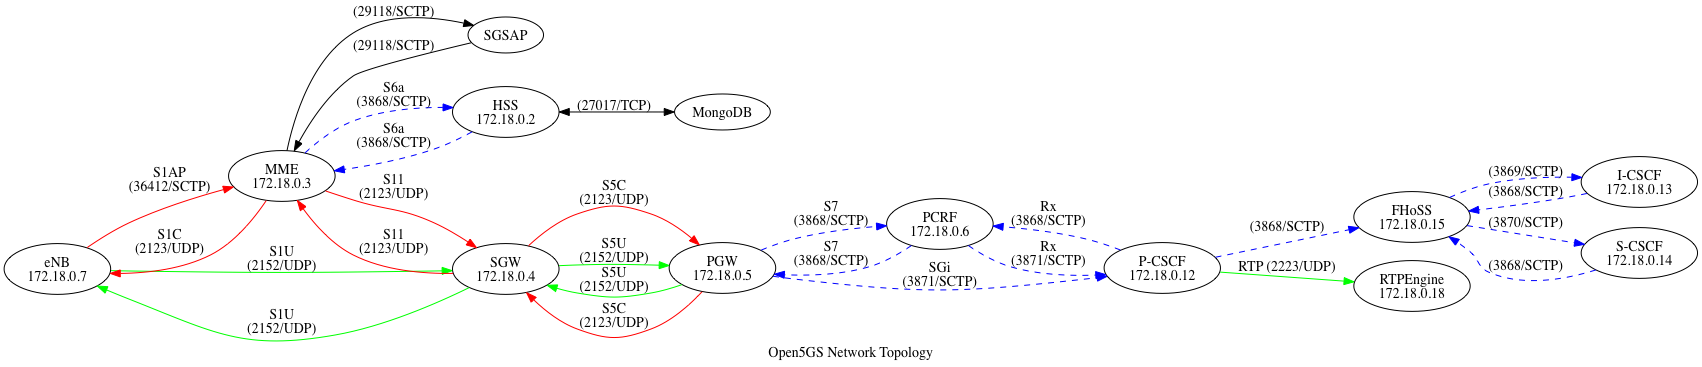 Network topology of Open5GS + IMS